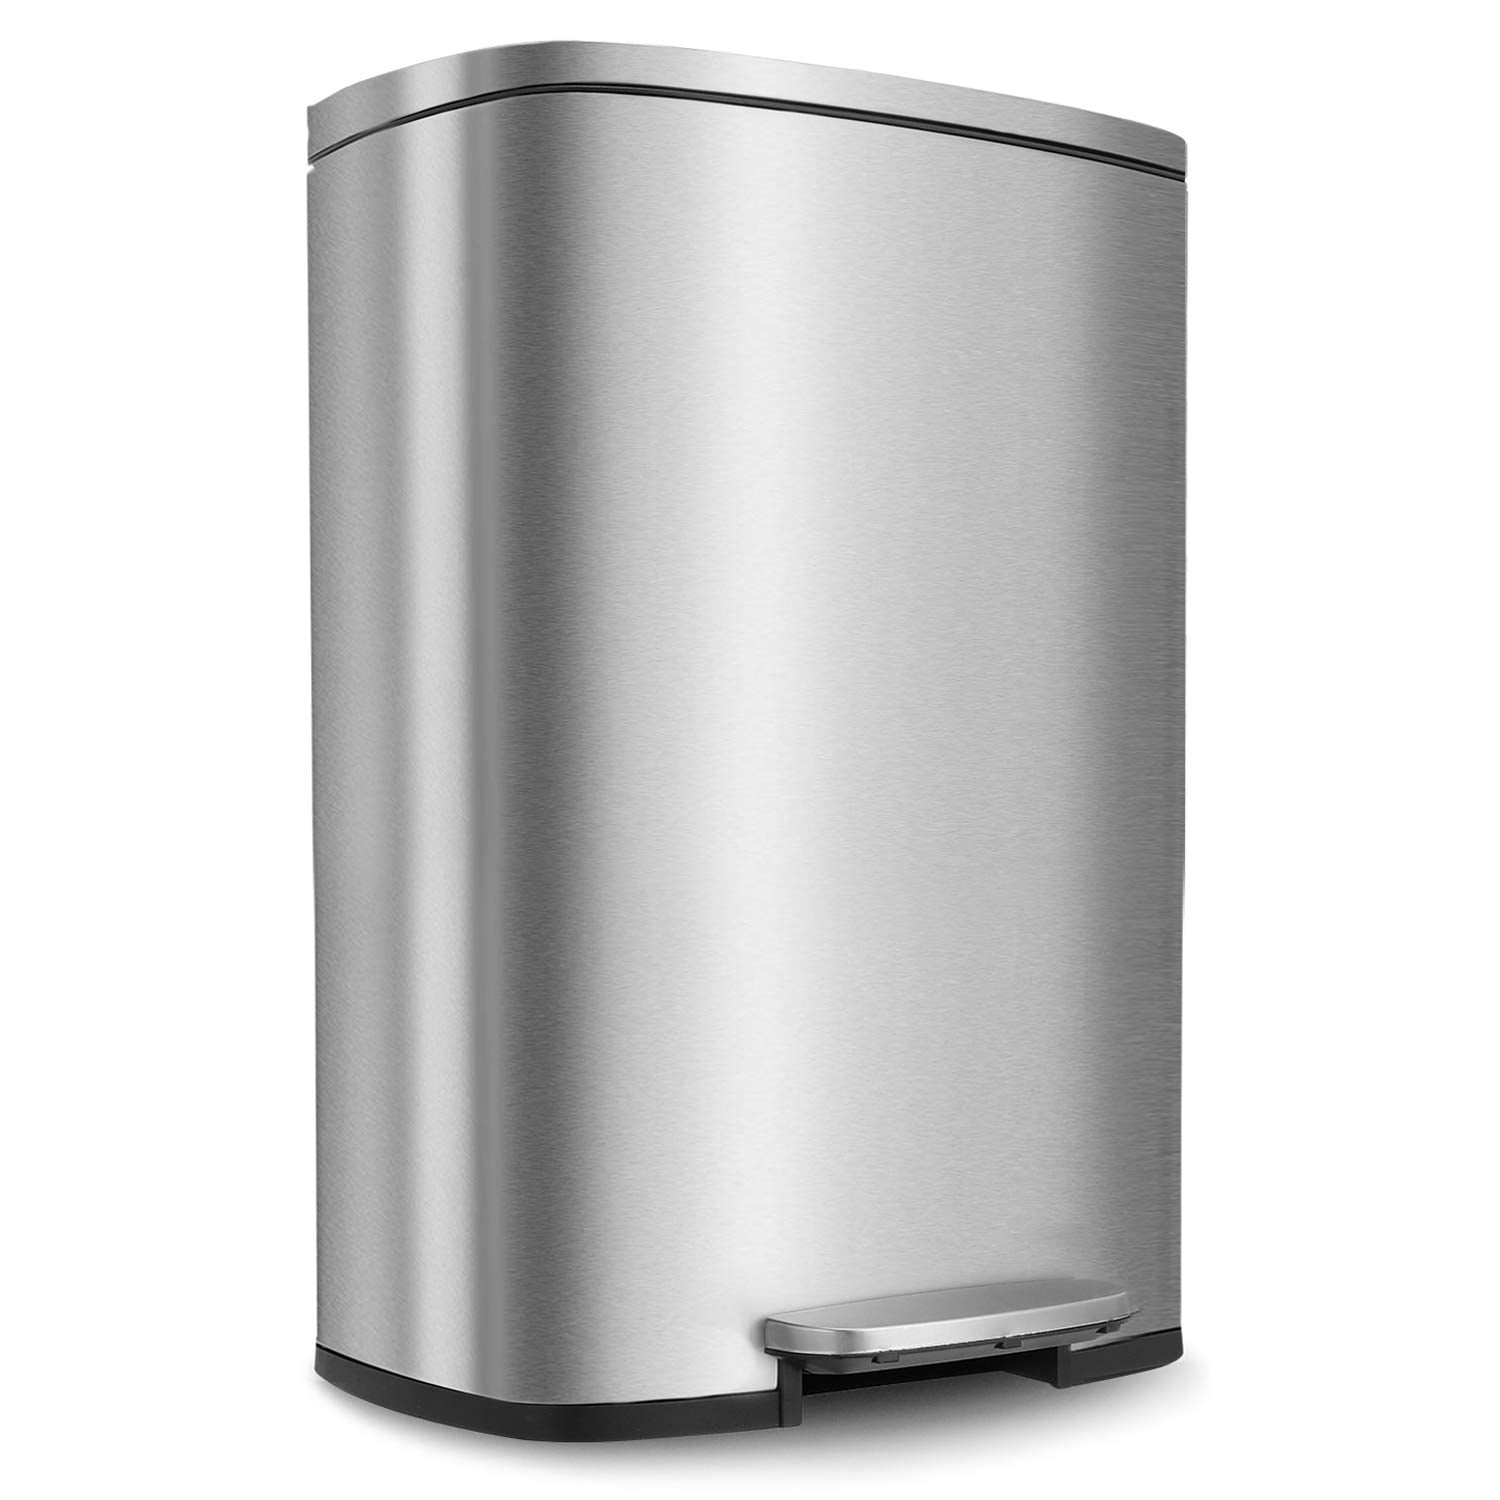 LAZY BUDDY 30 Liter 8 Gallon Trash Can with Foot Pedal, Stainless Steel Kitchen  Garbage Can with Lid, Home Office Wastebasket 